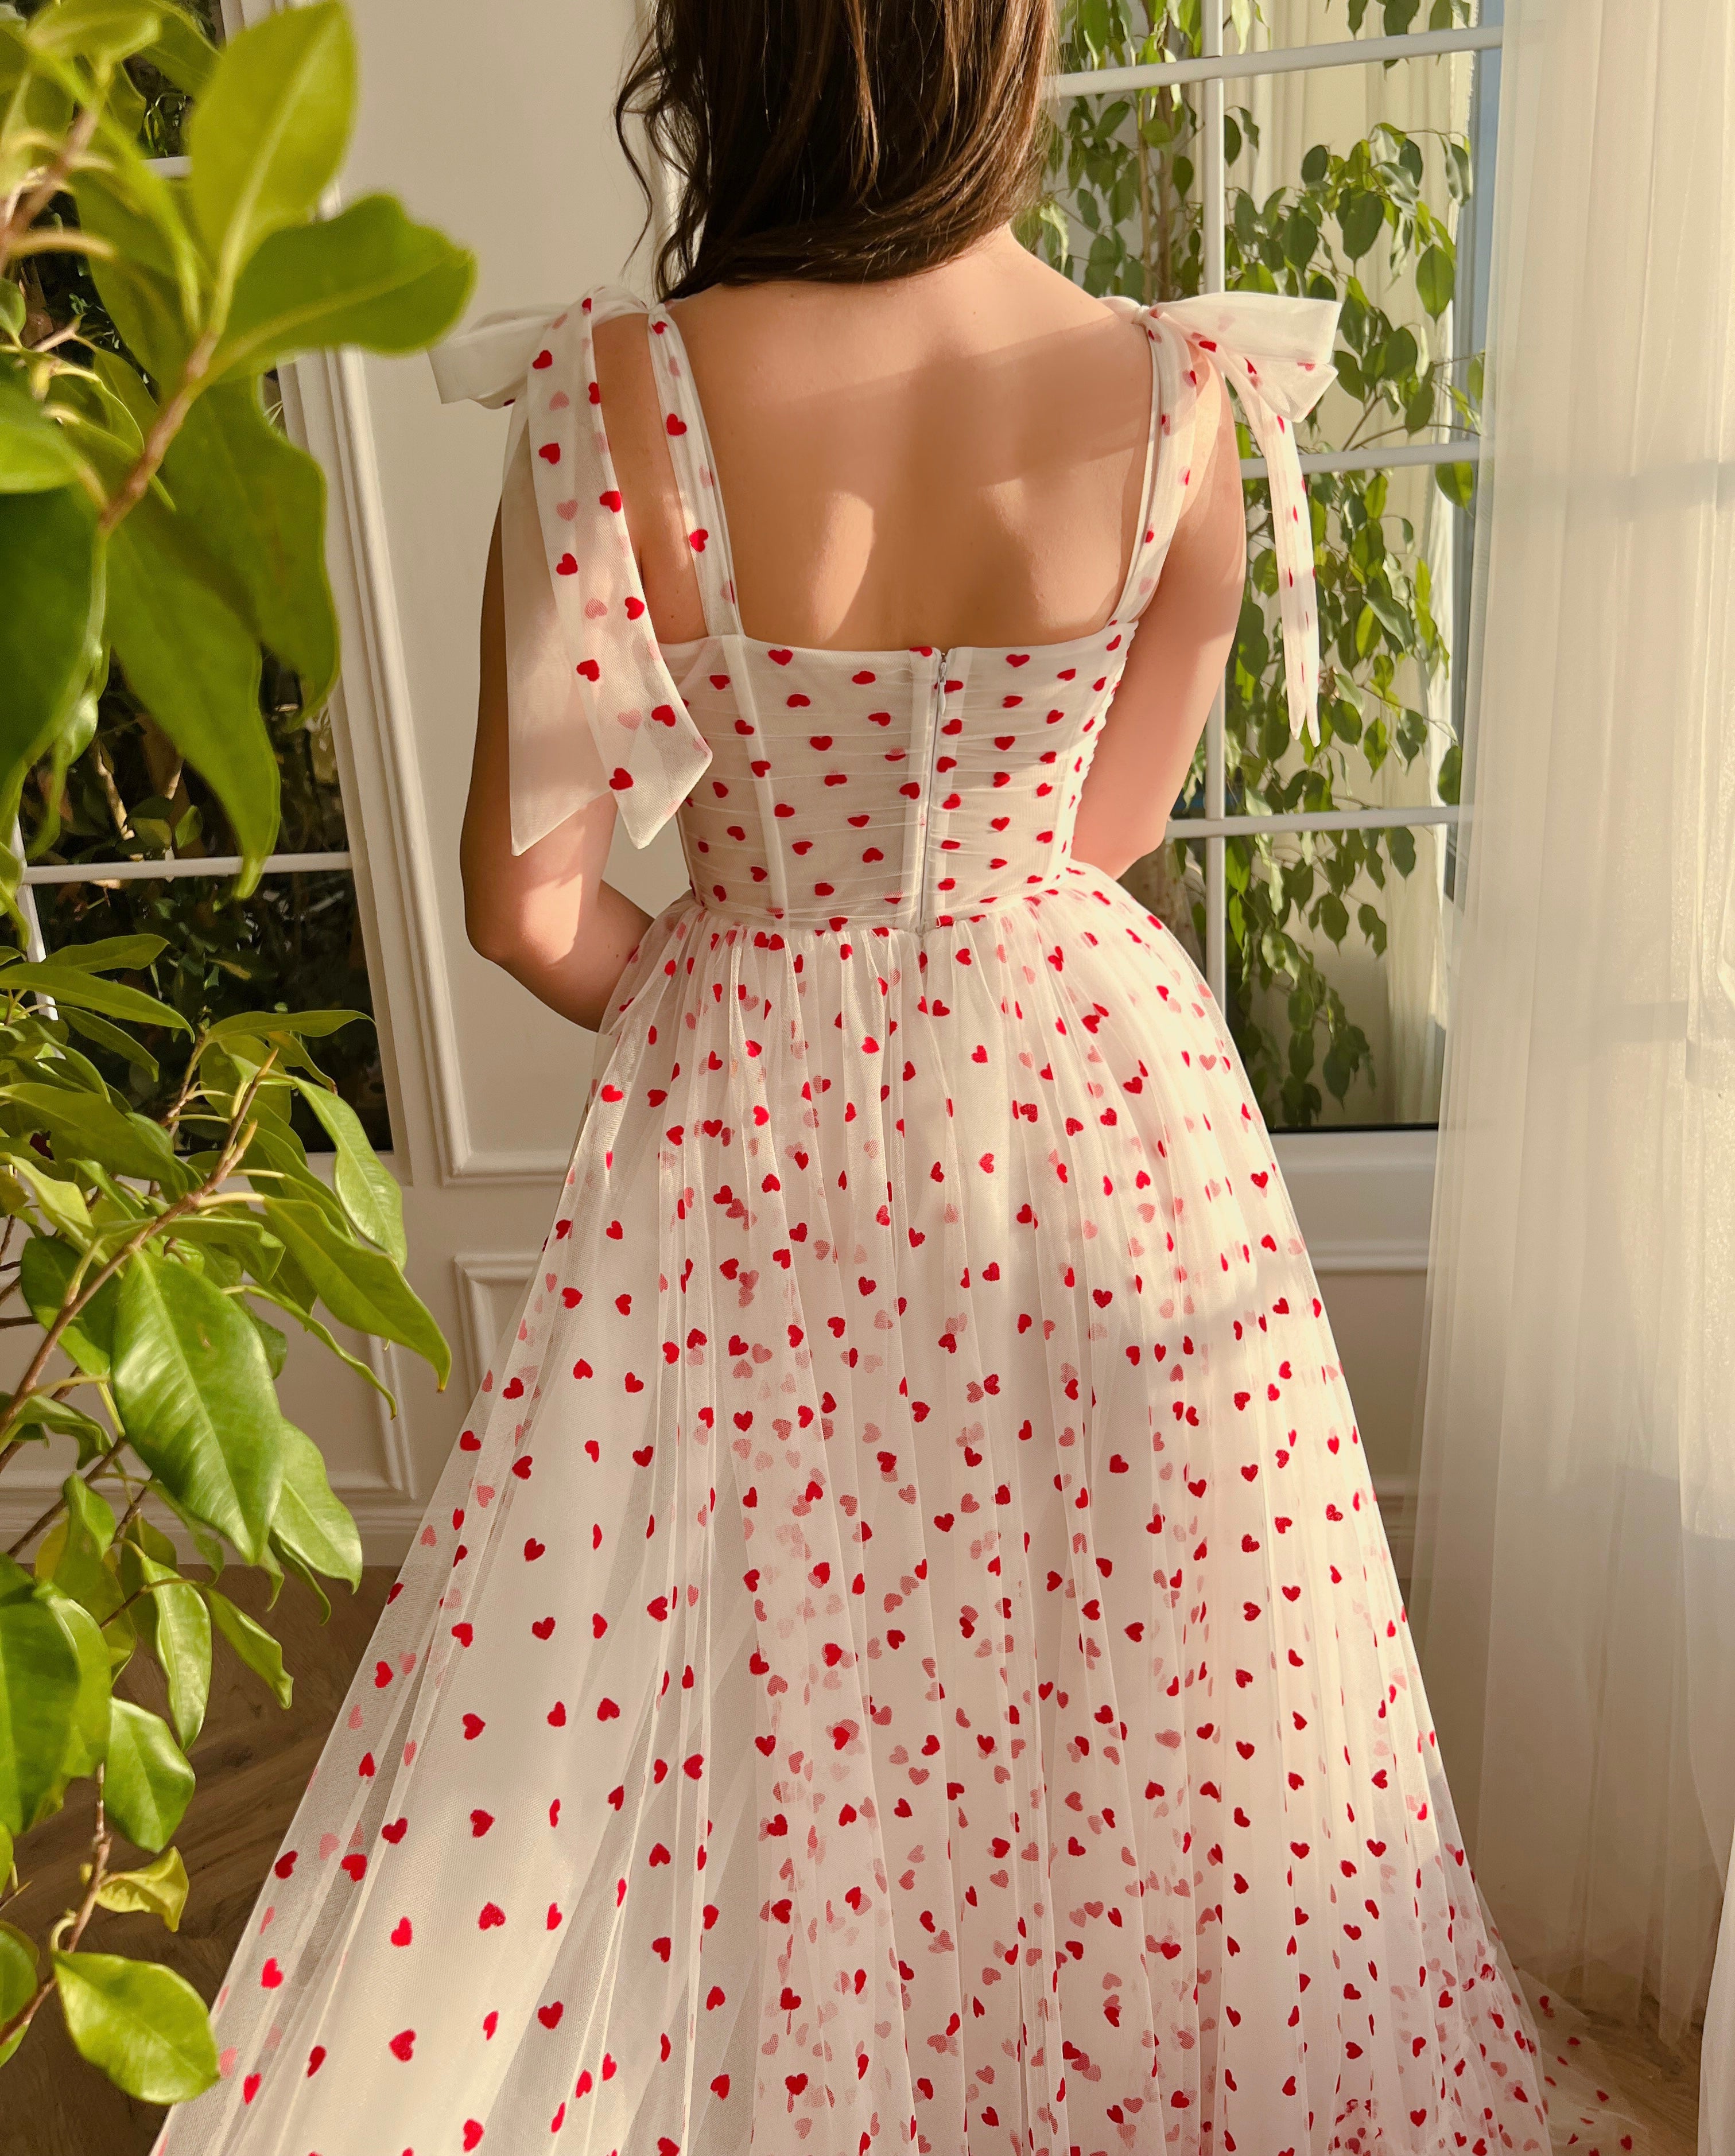 White A-Line dress with hearty print and bow straps